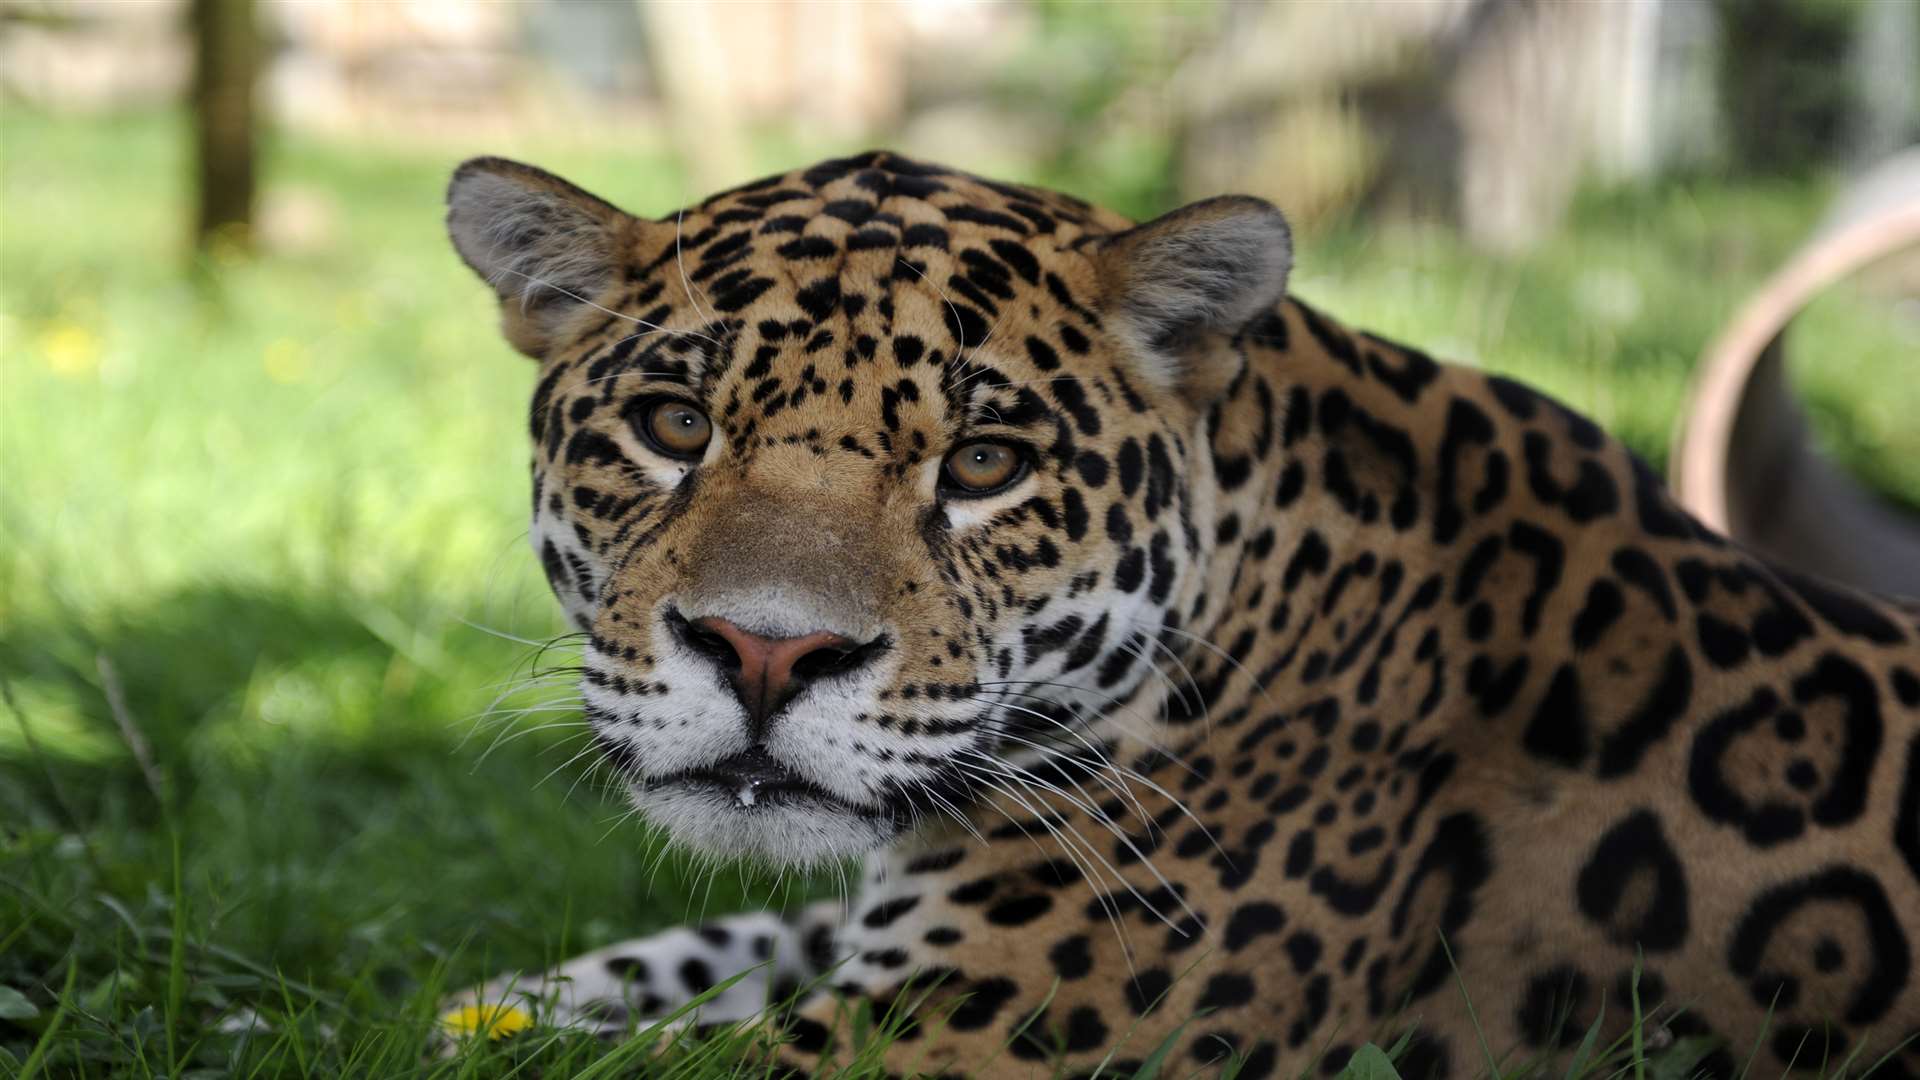 A jaguar, one of the animals at Wingham Wildlife Park